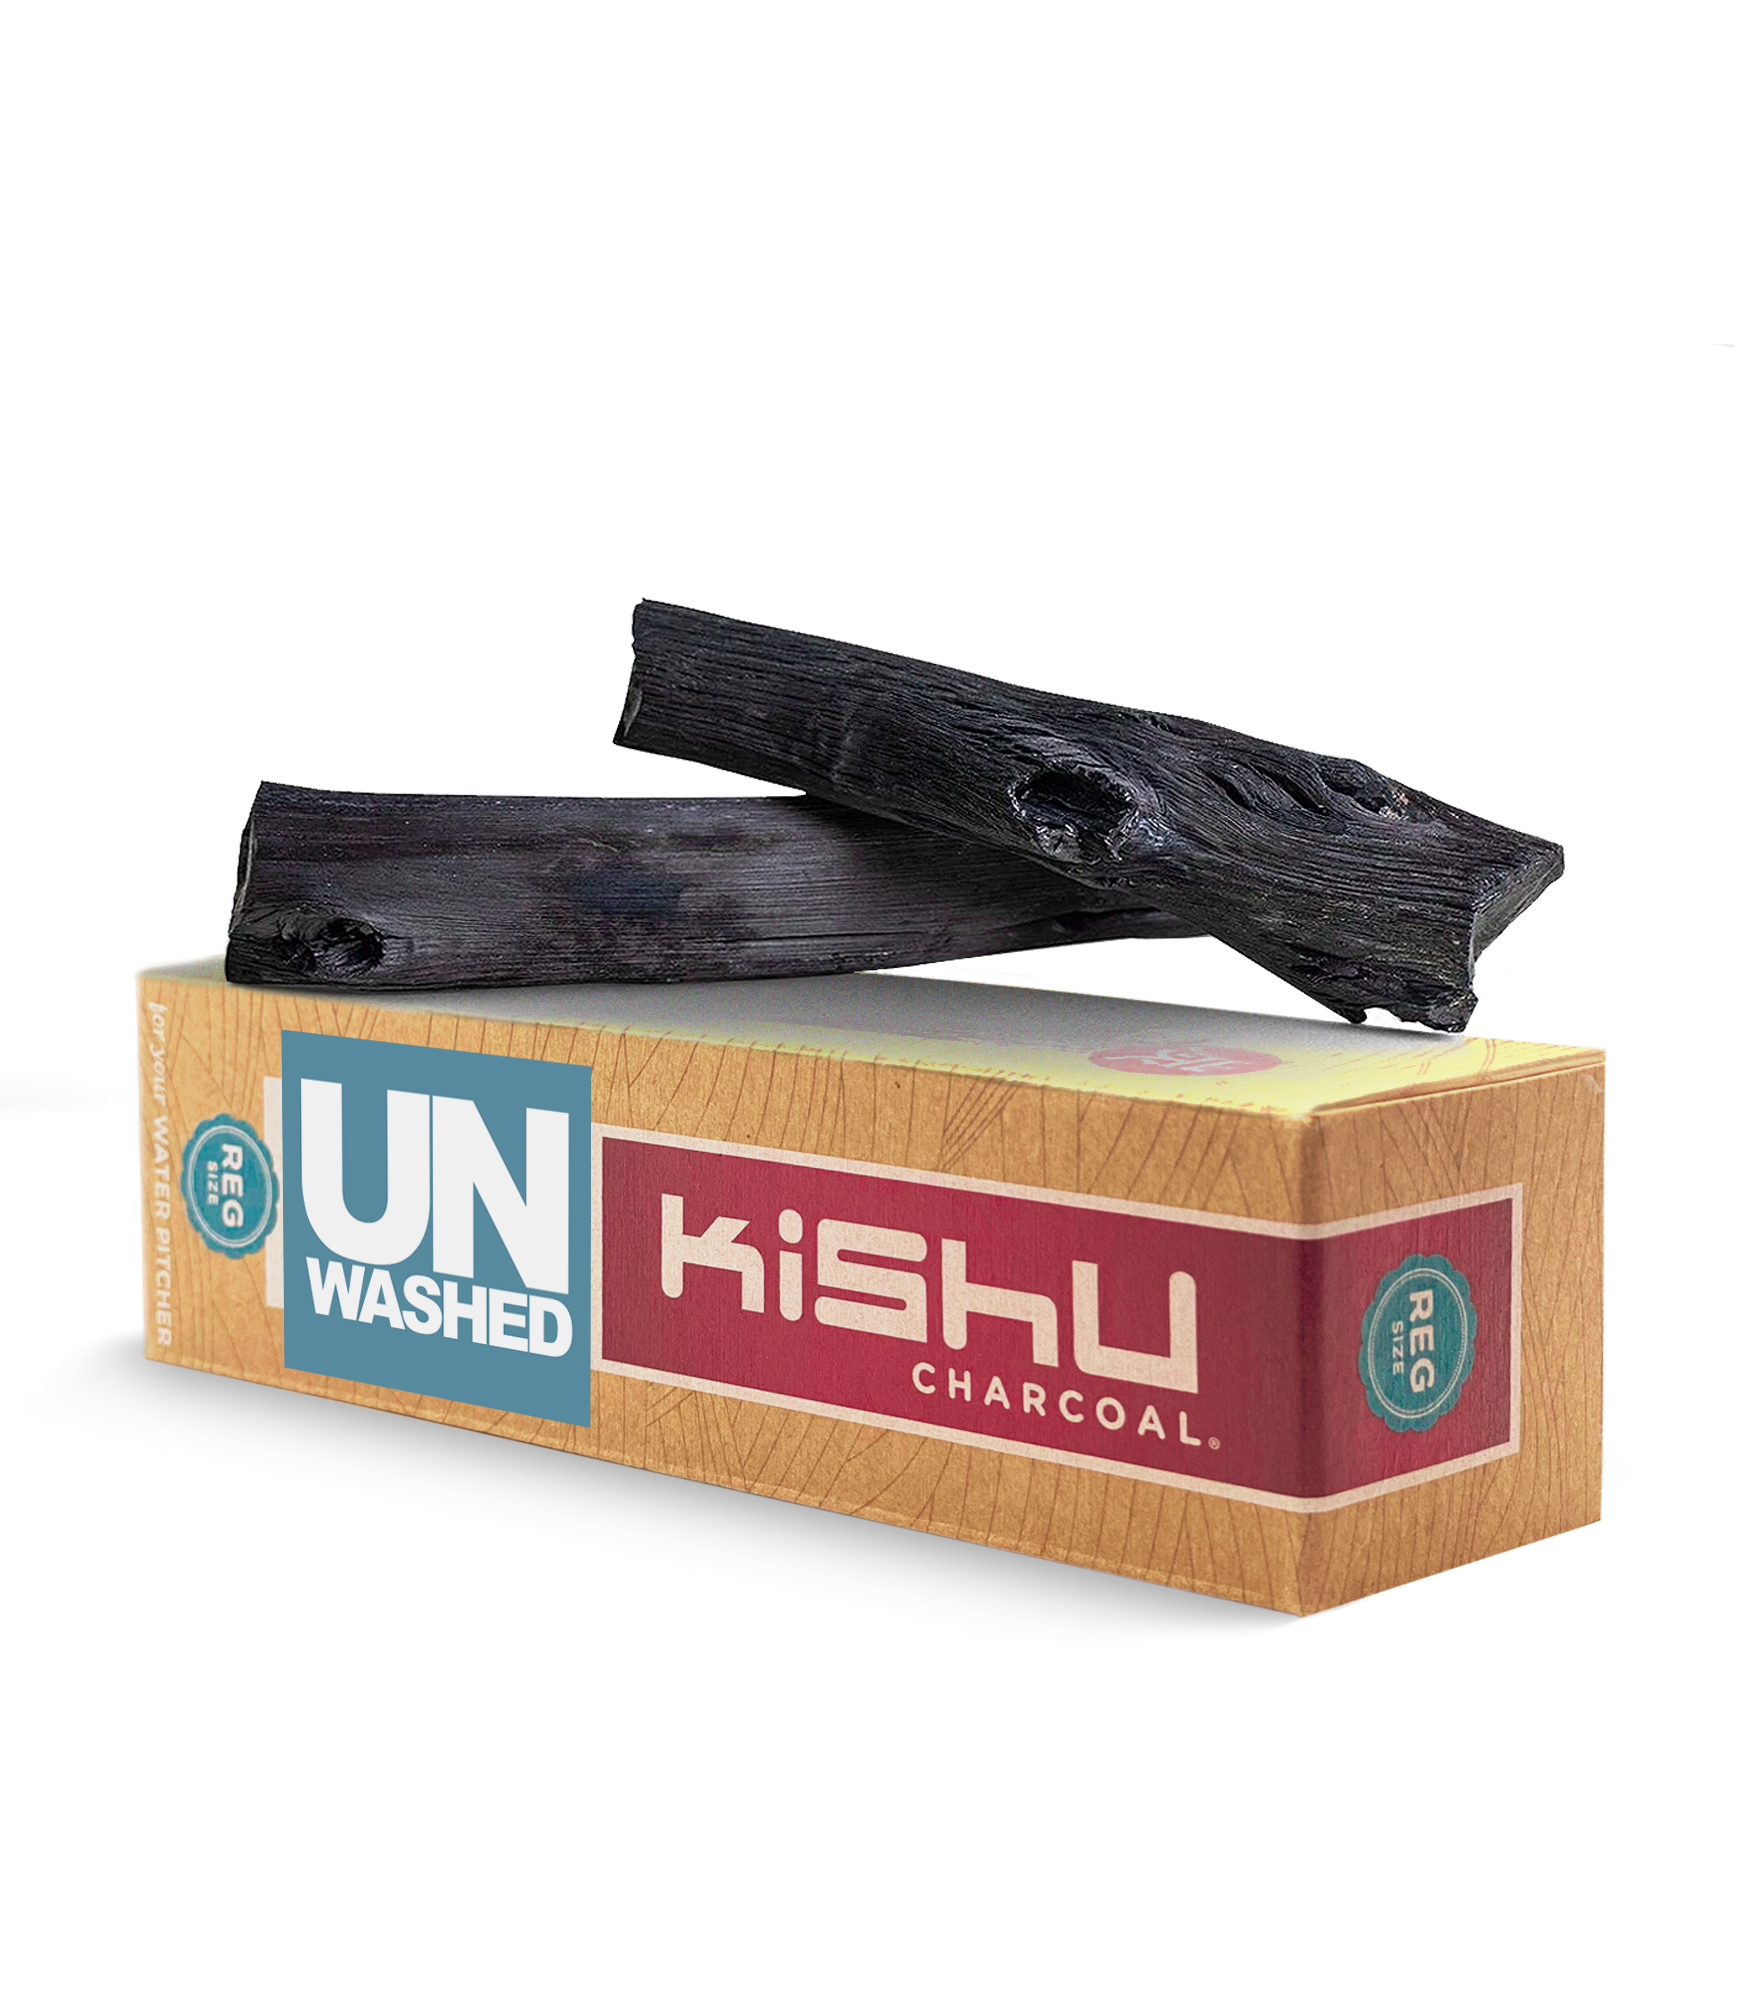 Kishu Charcoal Unwashed - 2 Regular Sticks for Pitchers. The only CERTIFIED and TESTED Activated Charcoal.